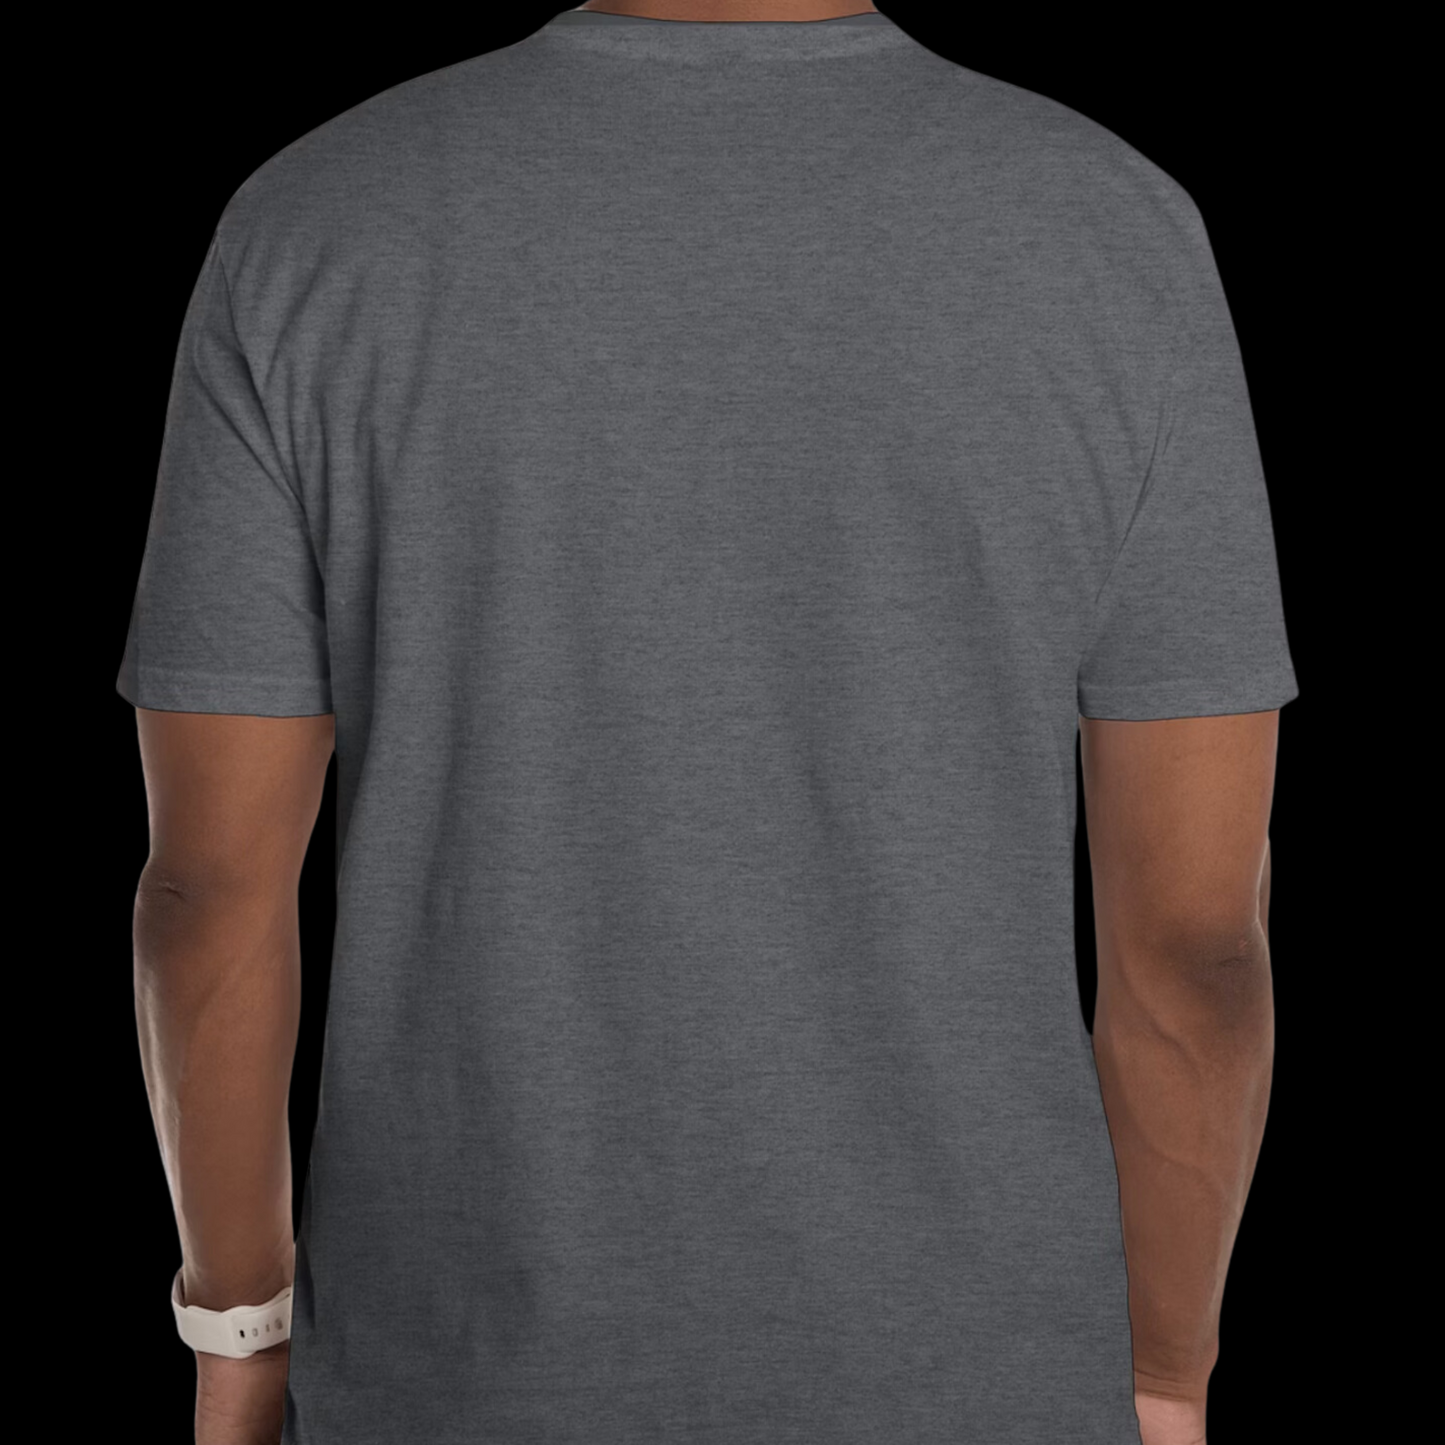 DigiPen College Shirt in Heather Gray